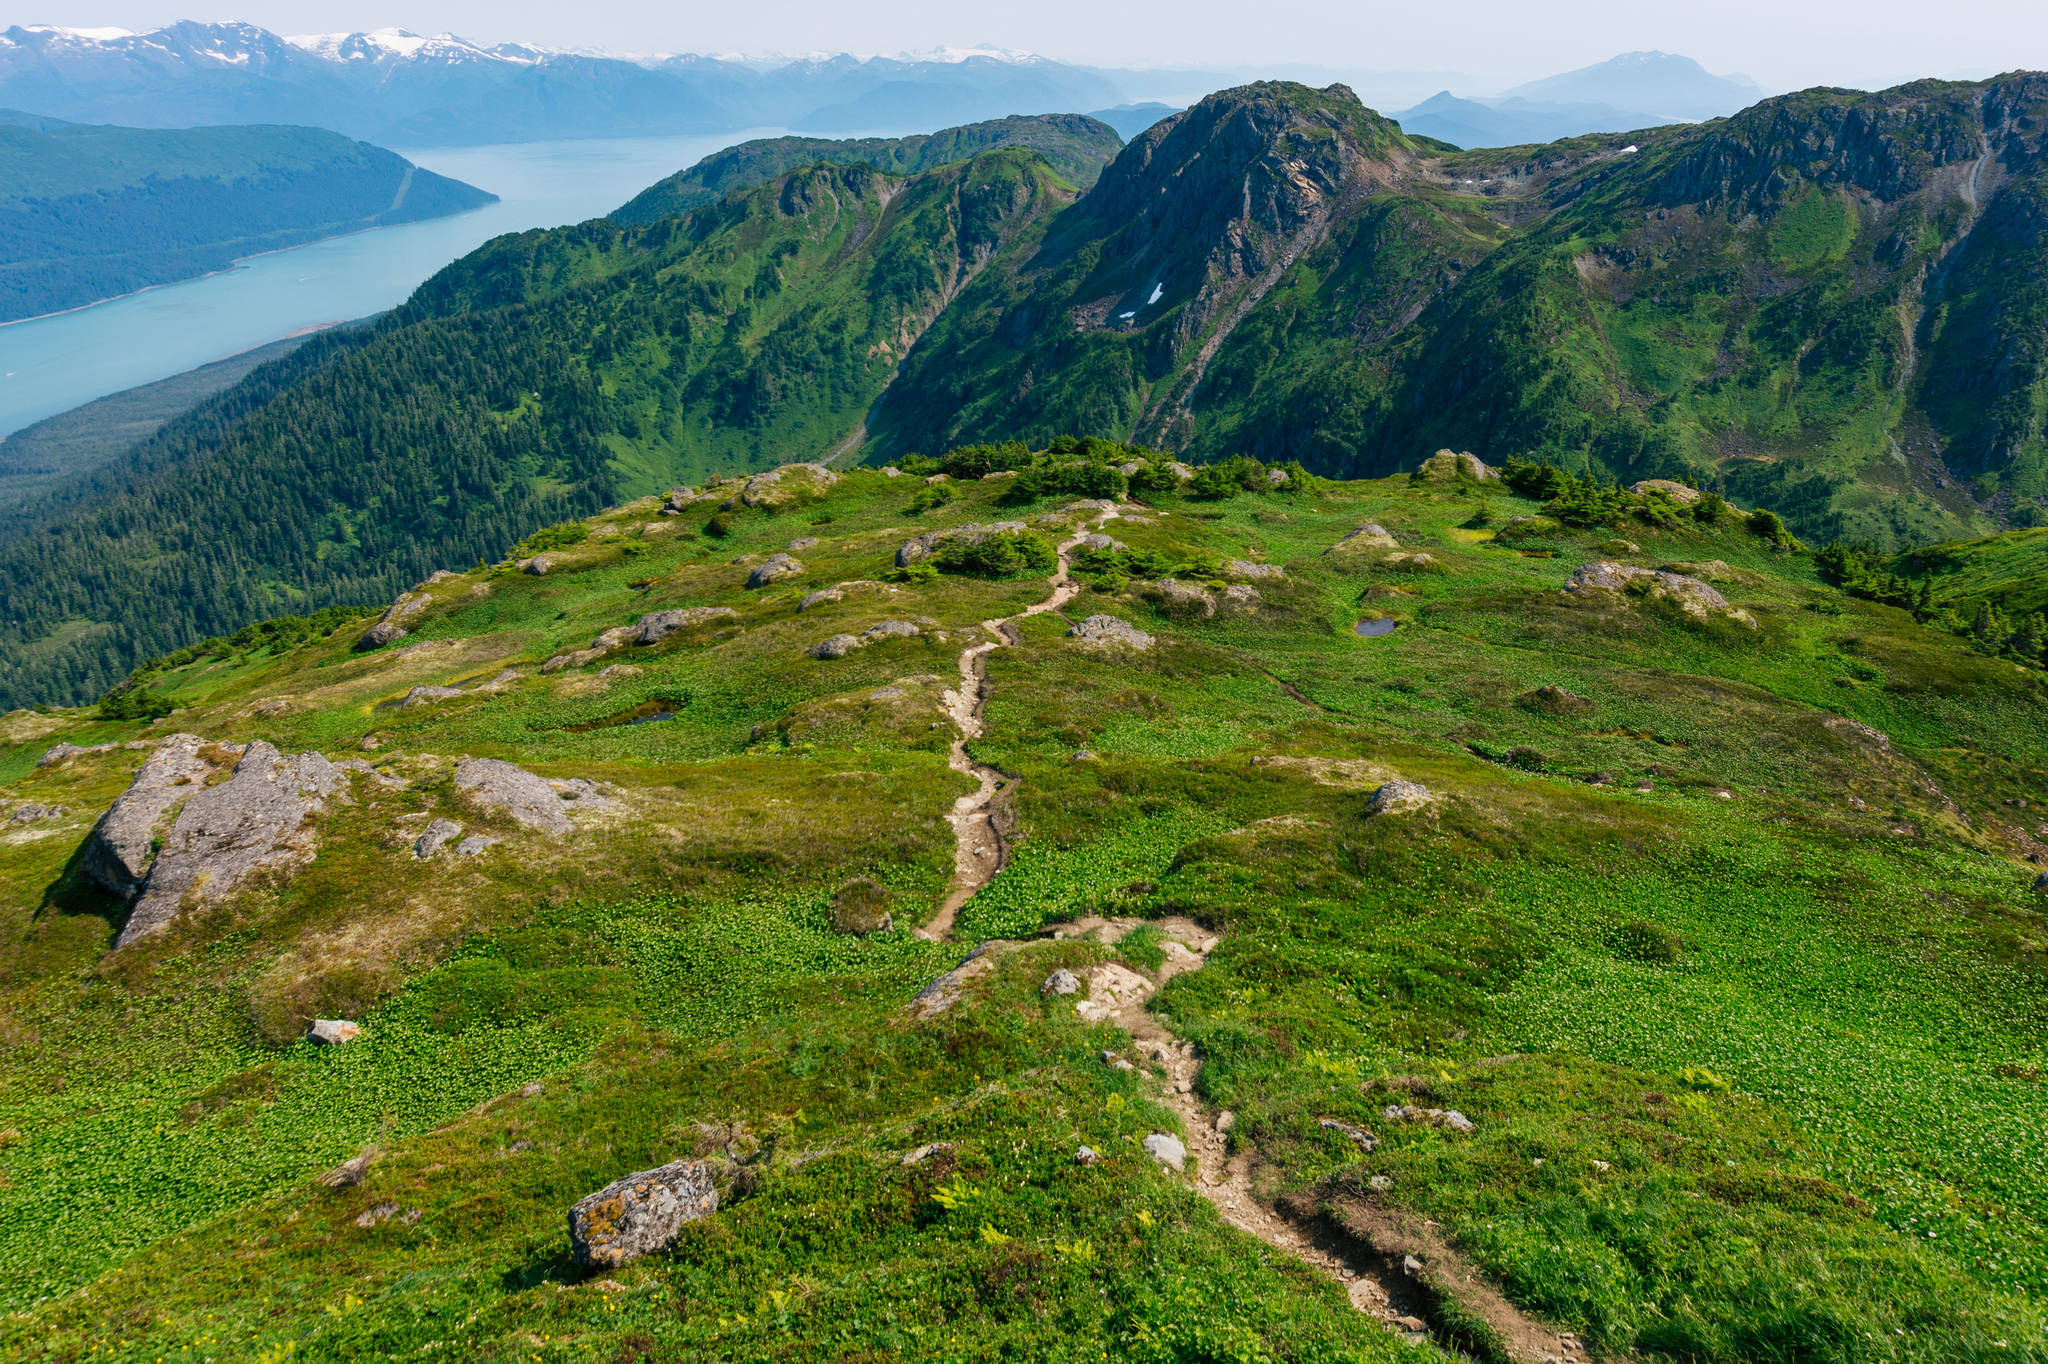 The alpine section of the trail. (Photo by Gabriel Donohoe)